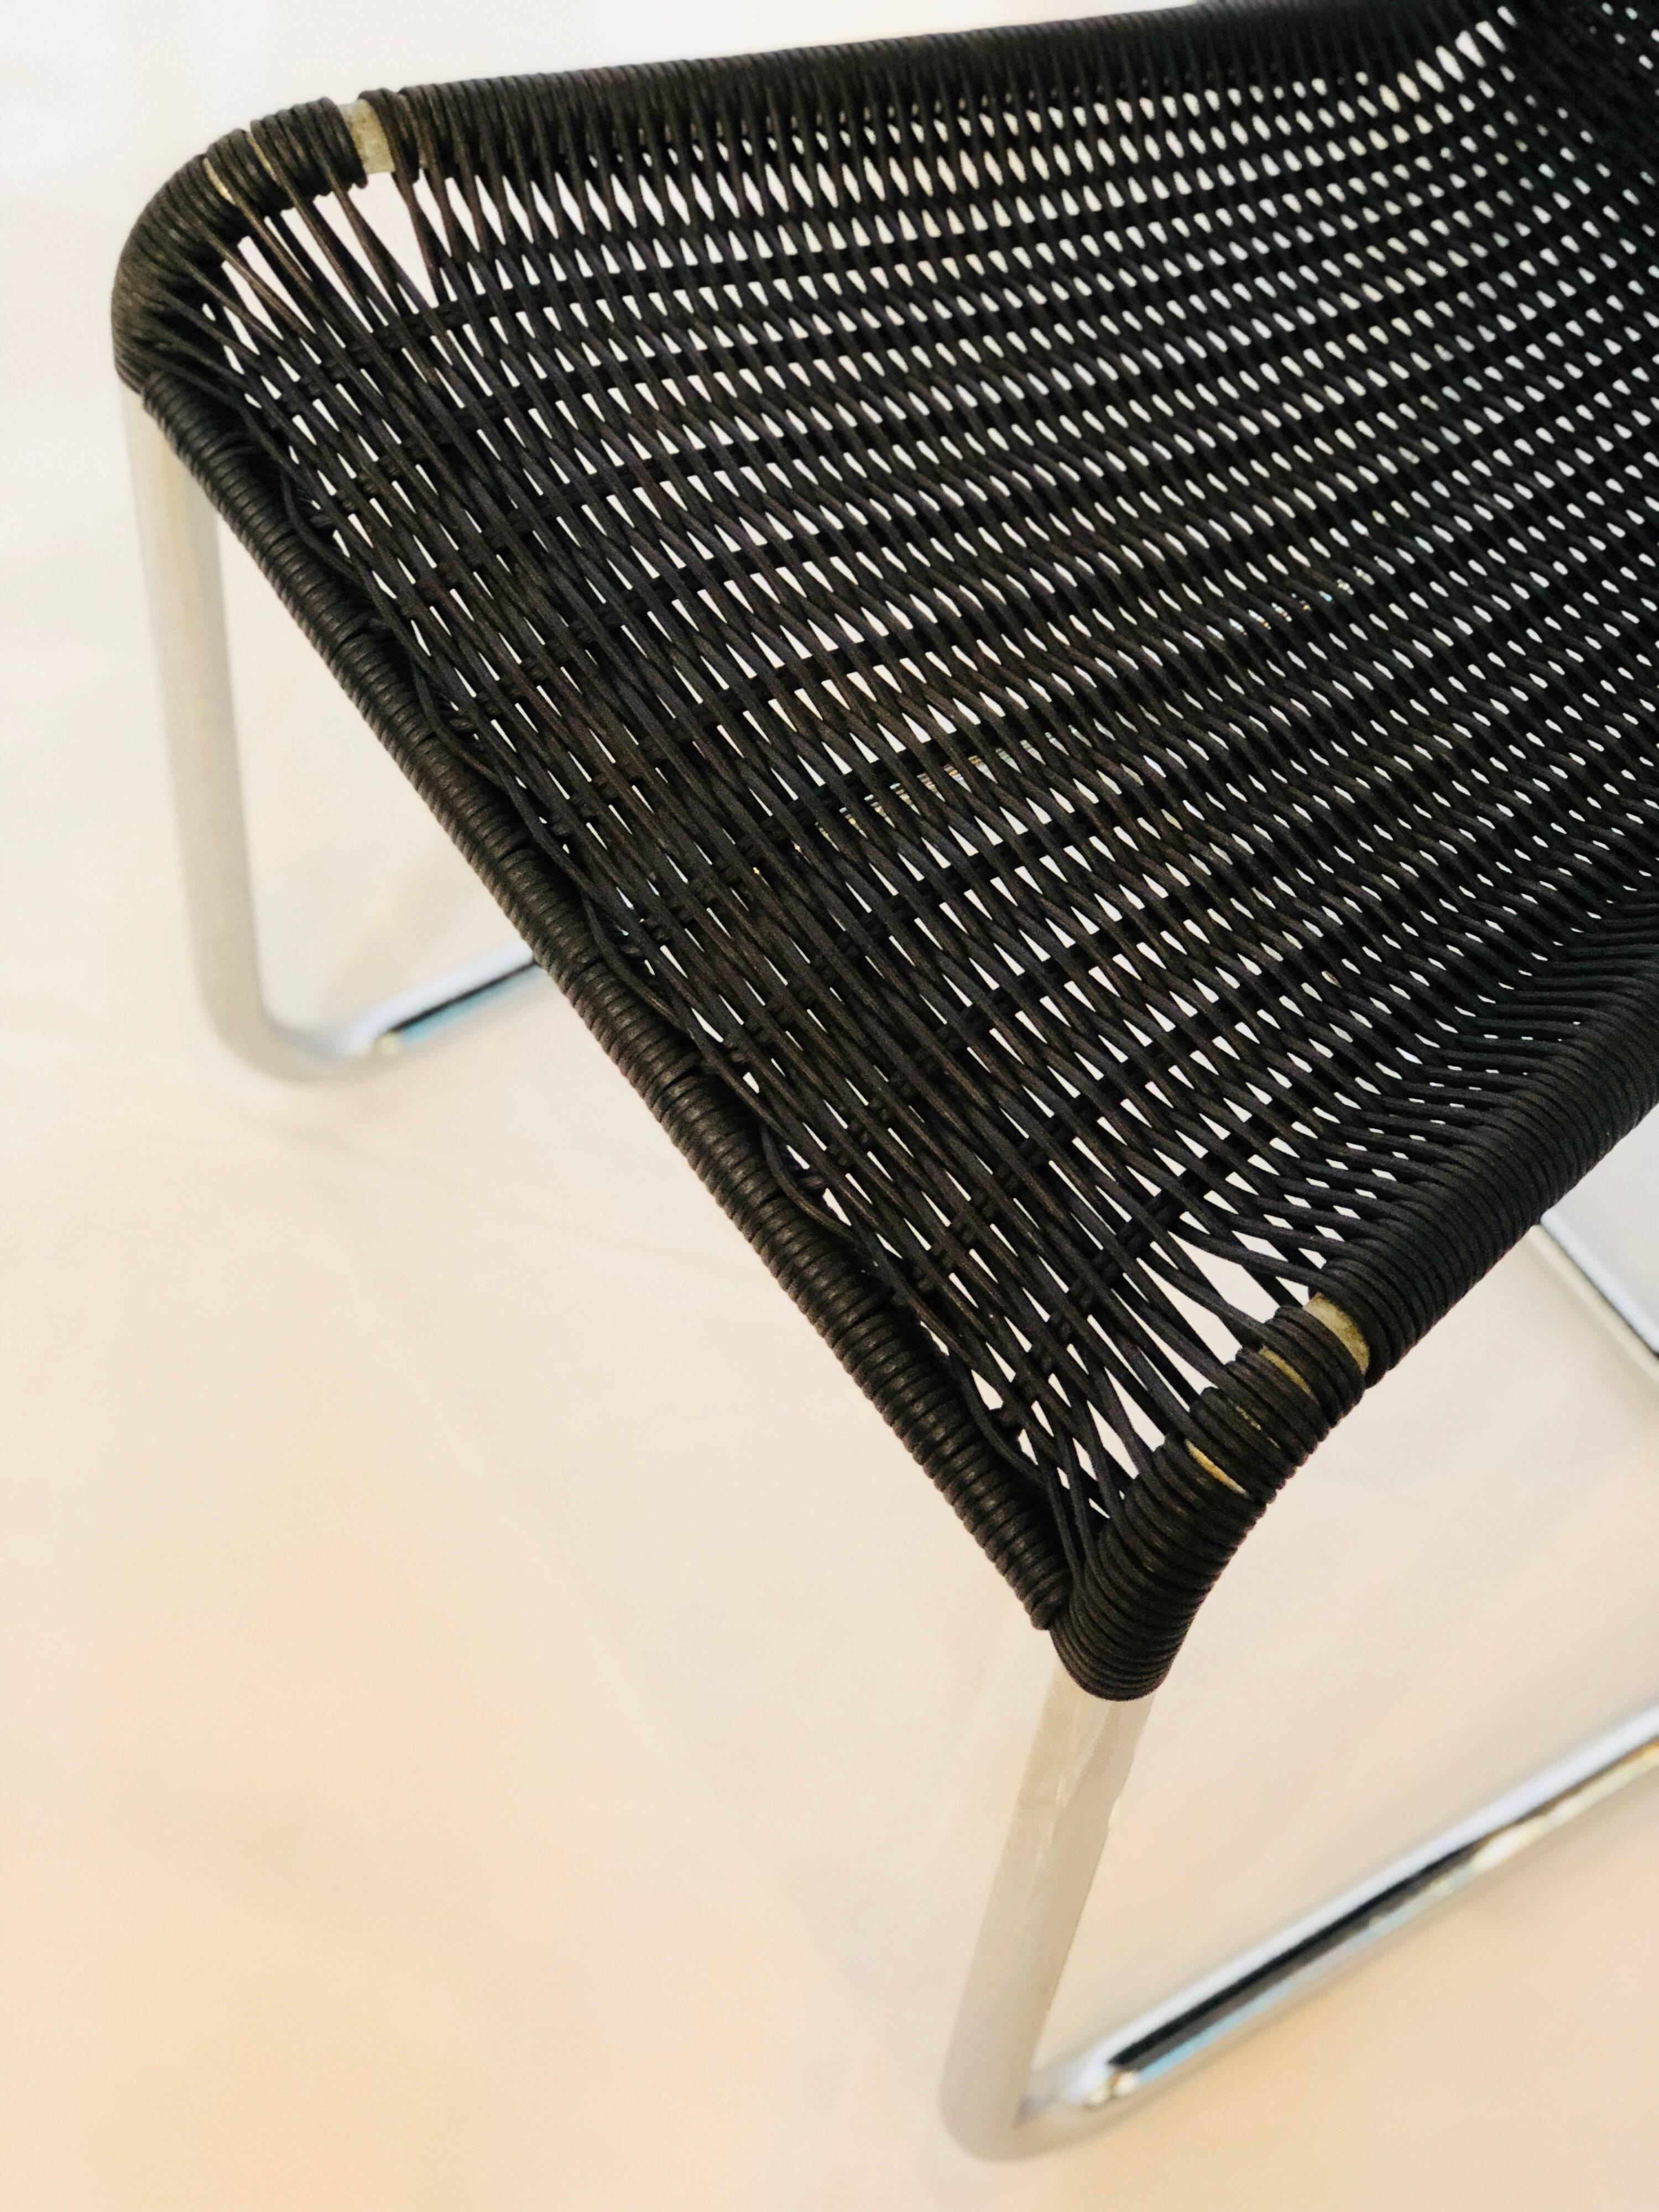 Jean Prouvé D20 Stainless Steel Leather Wicker Chairs for Tecta, Germany, 1980s In Good Condition For Sale In Miami, FL